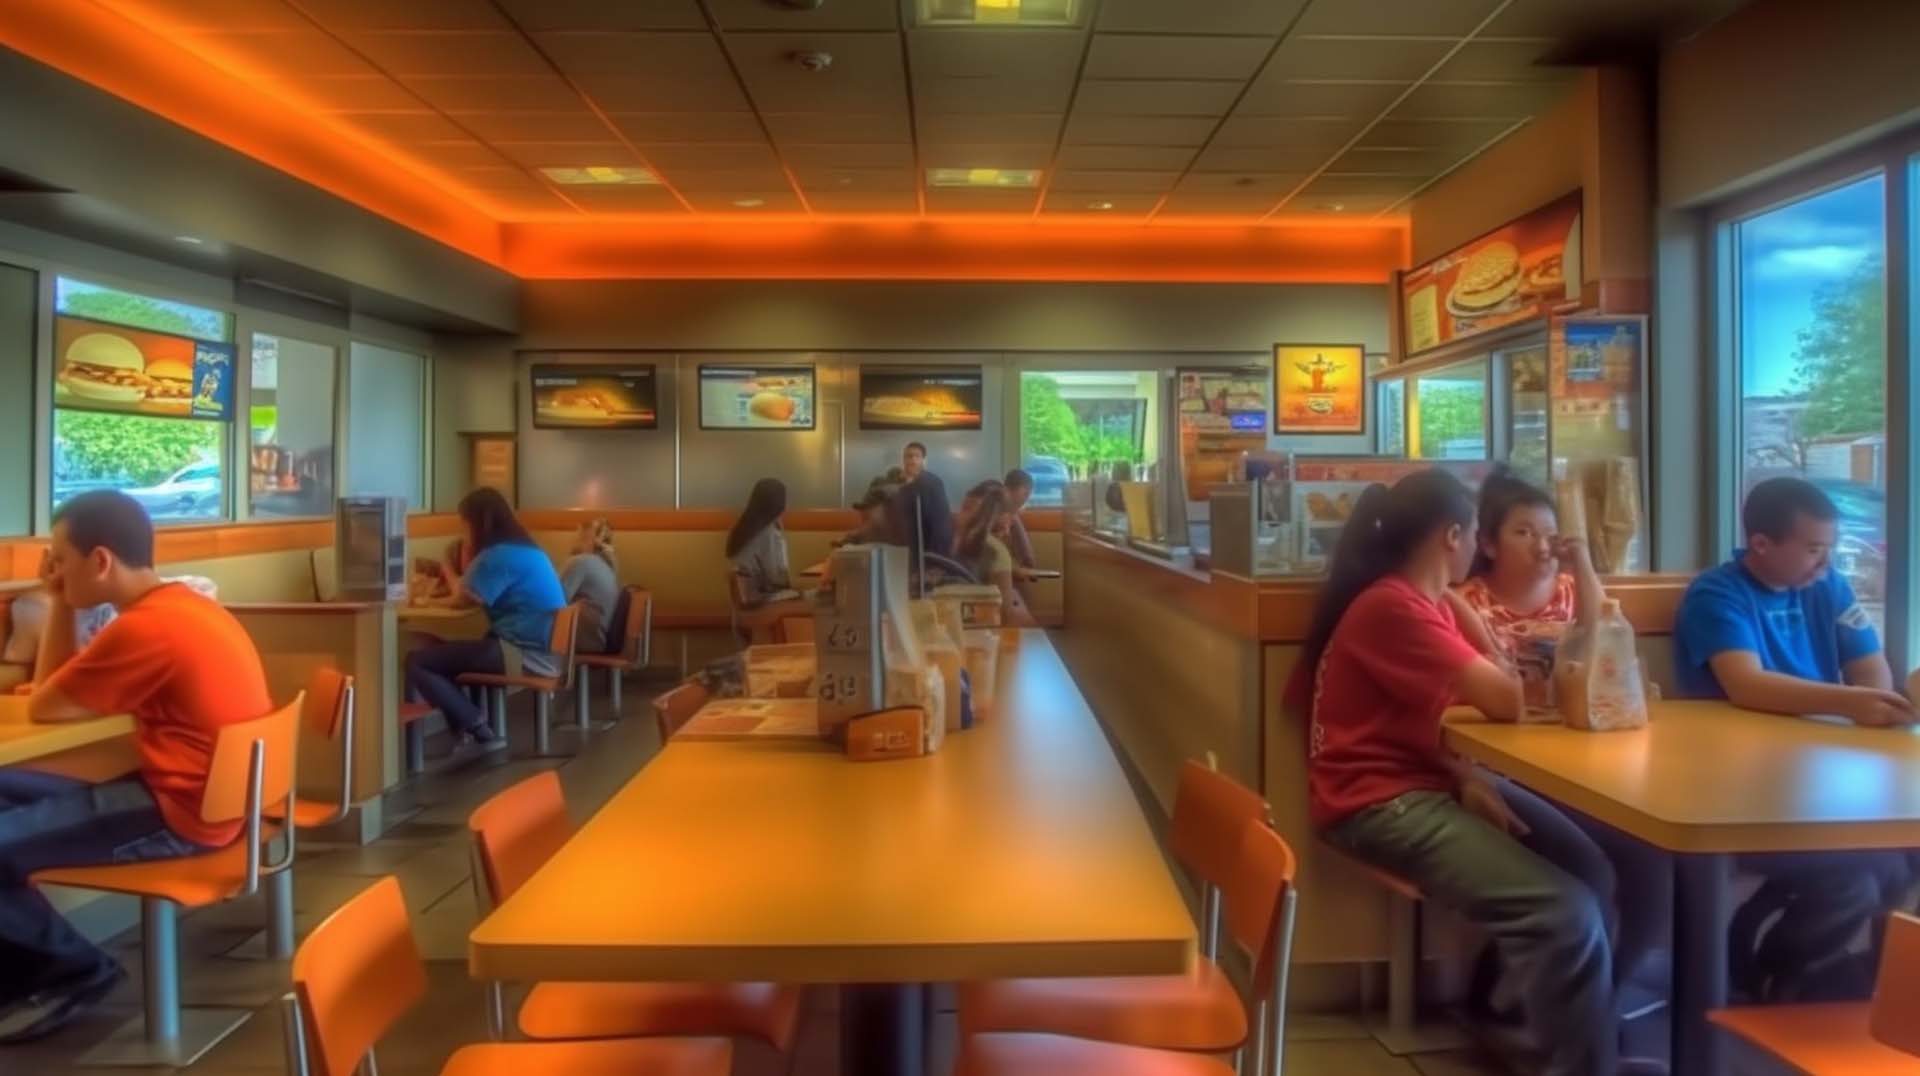 Lompoc has a wide variety of delicious fast food options to choose from.